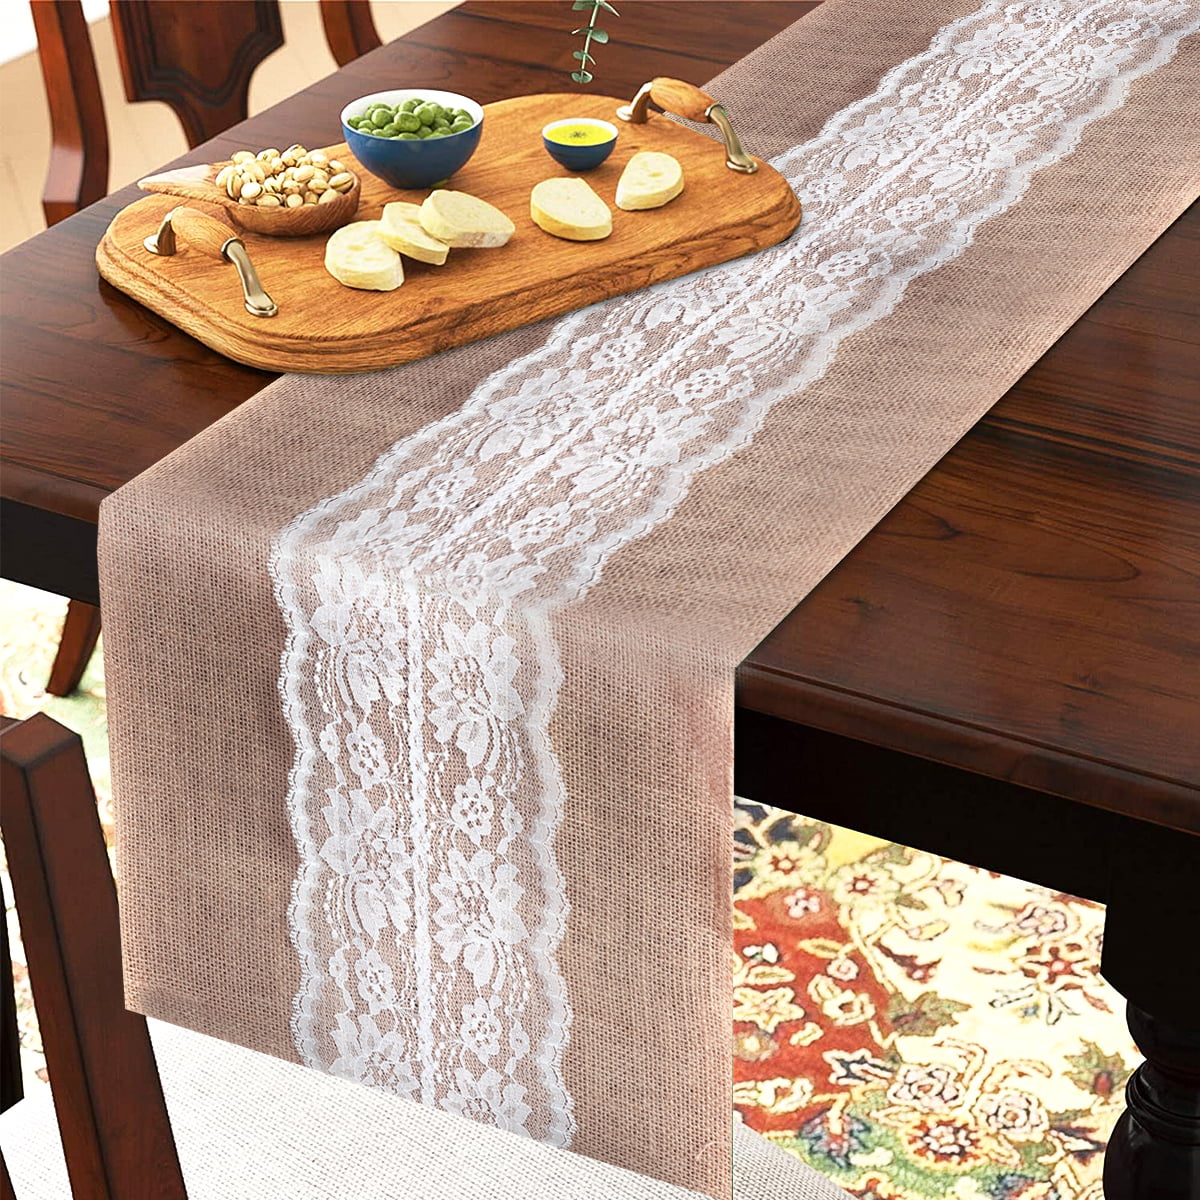 20×Burlap Lace Hessian Table Runner Rustic Jute Country Wedding Party Decor 